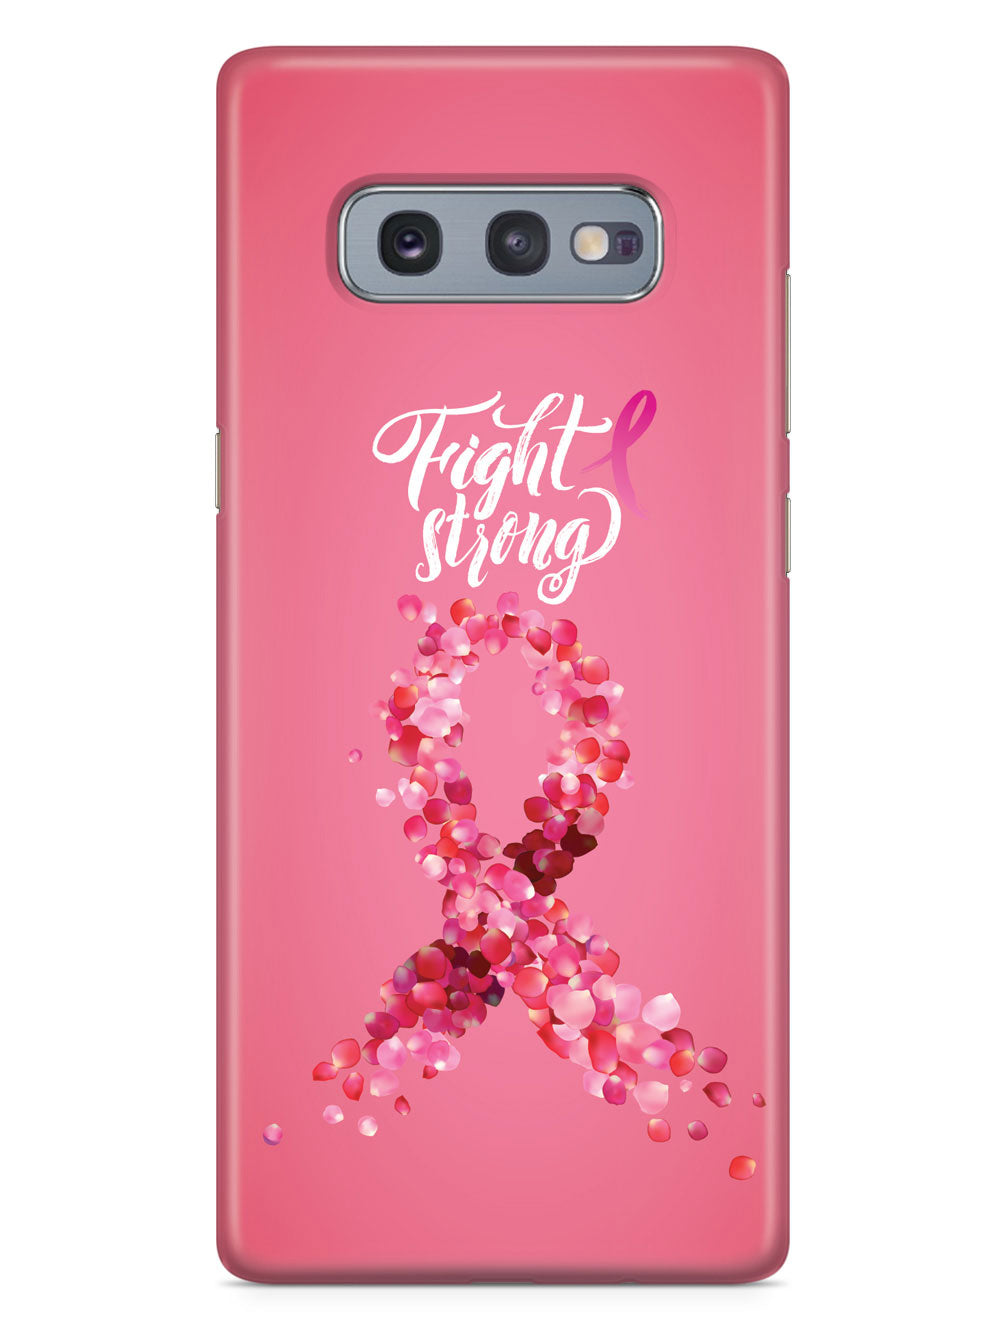 Fight Strong - Breast Cancer Awareness - White Case